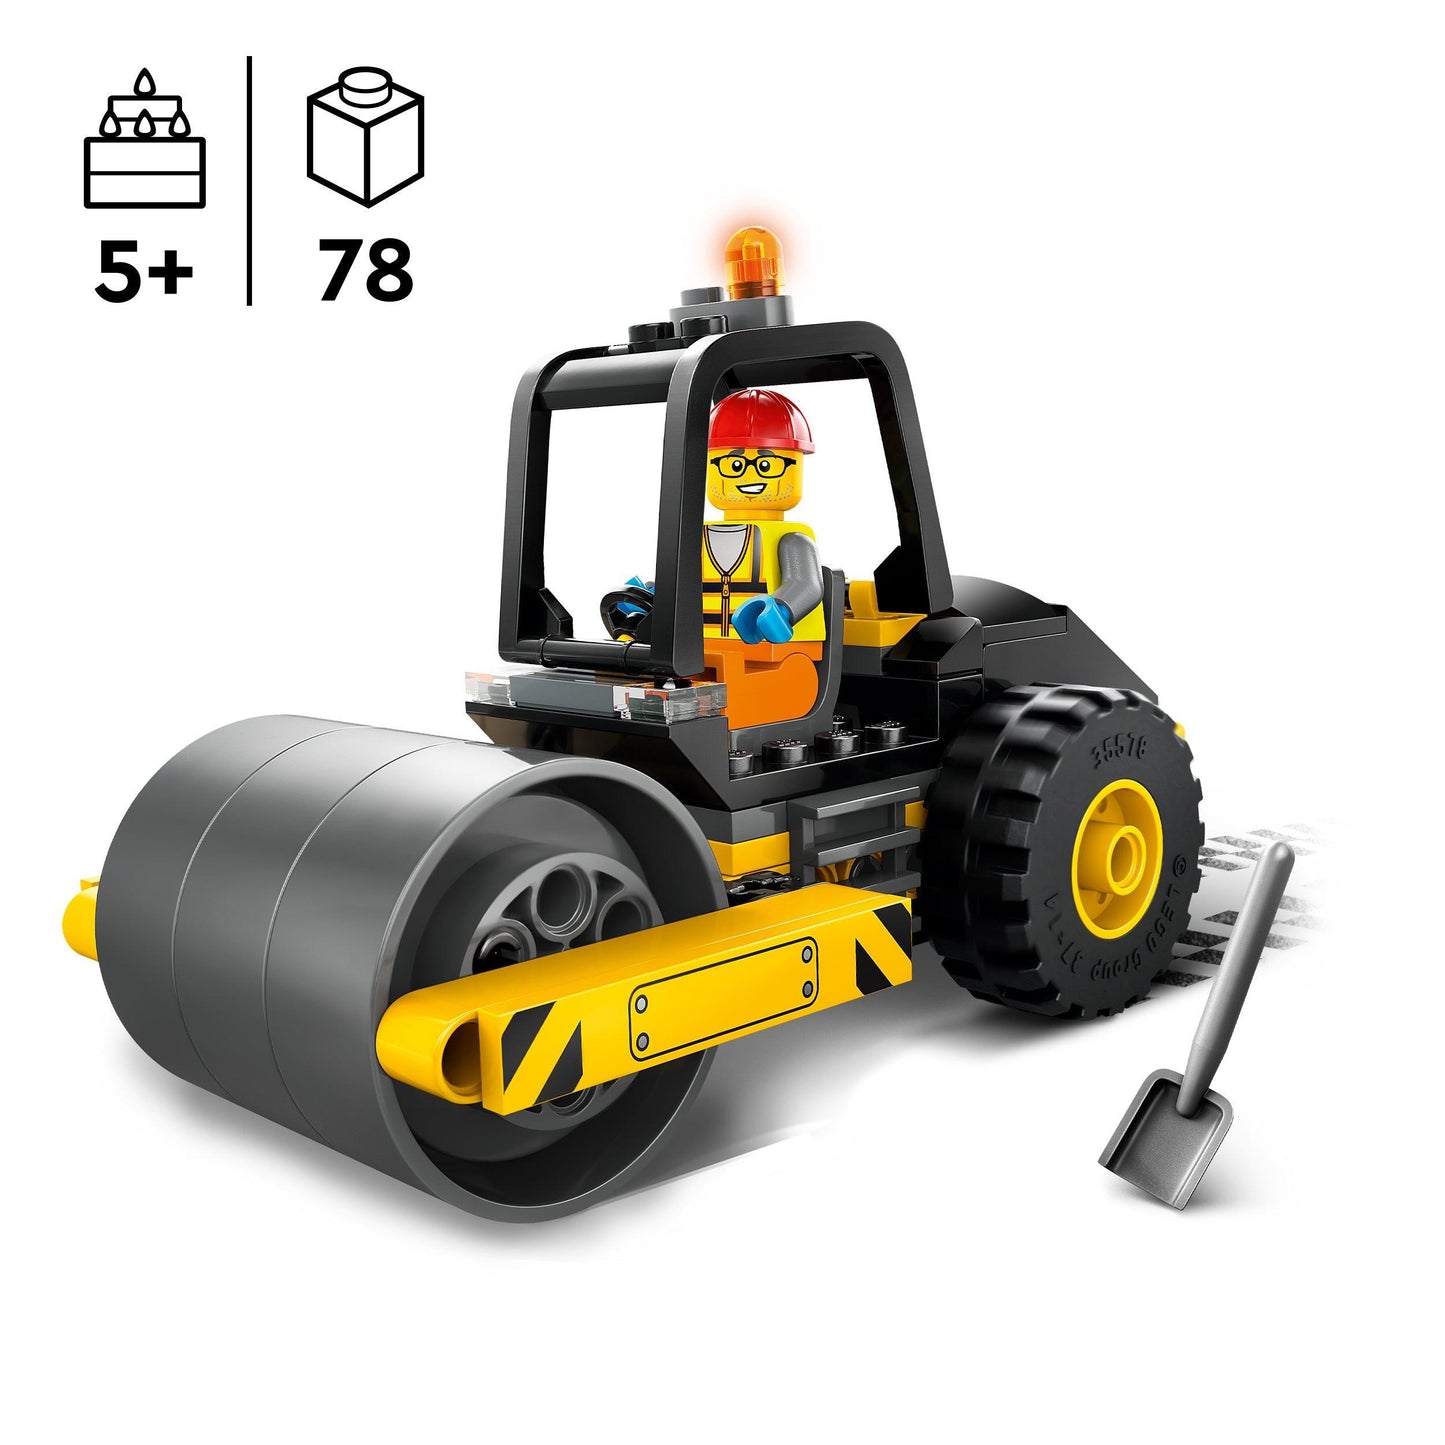 LEGO Stoomwals 60401 City | 2TTOYS ✓ Official shop<br>